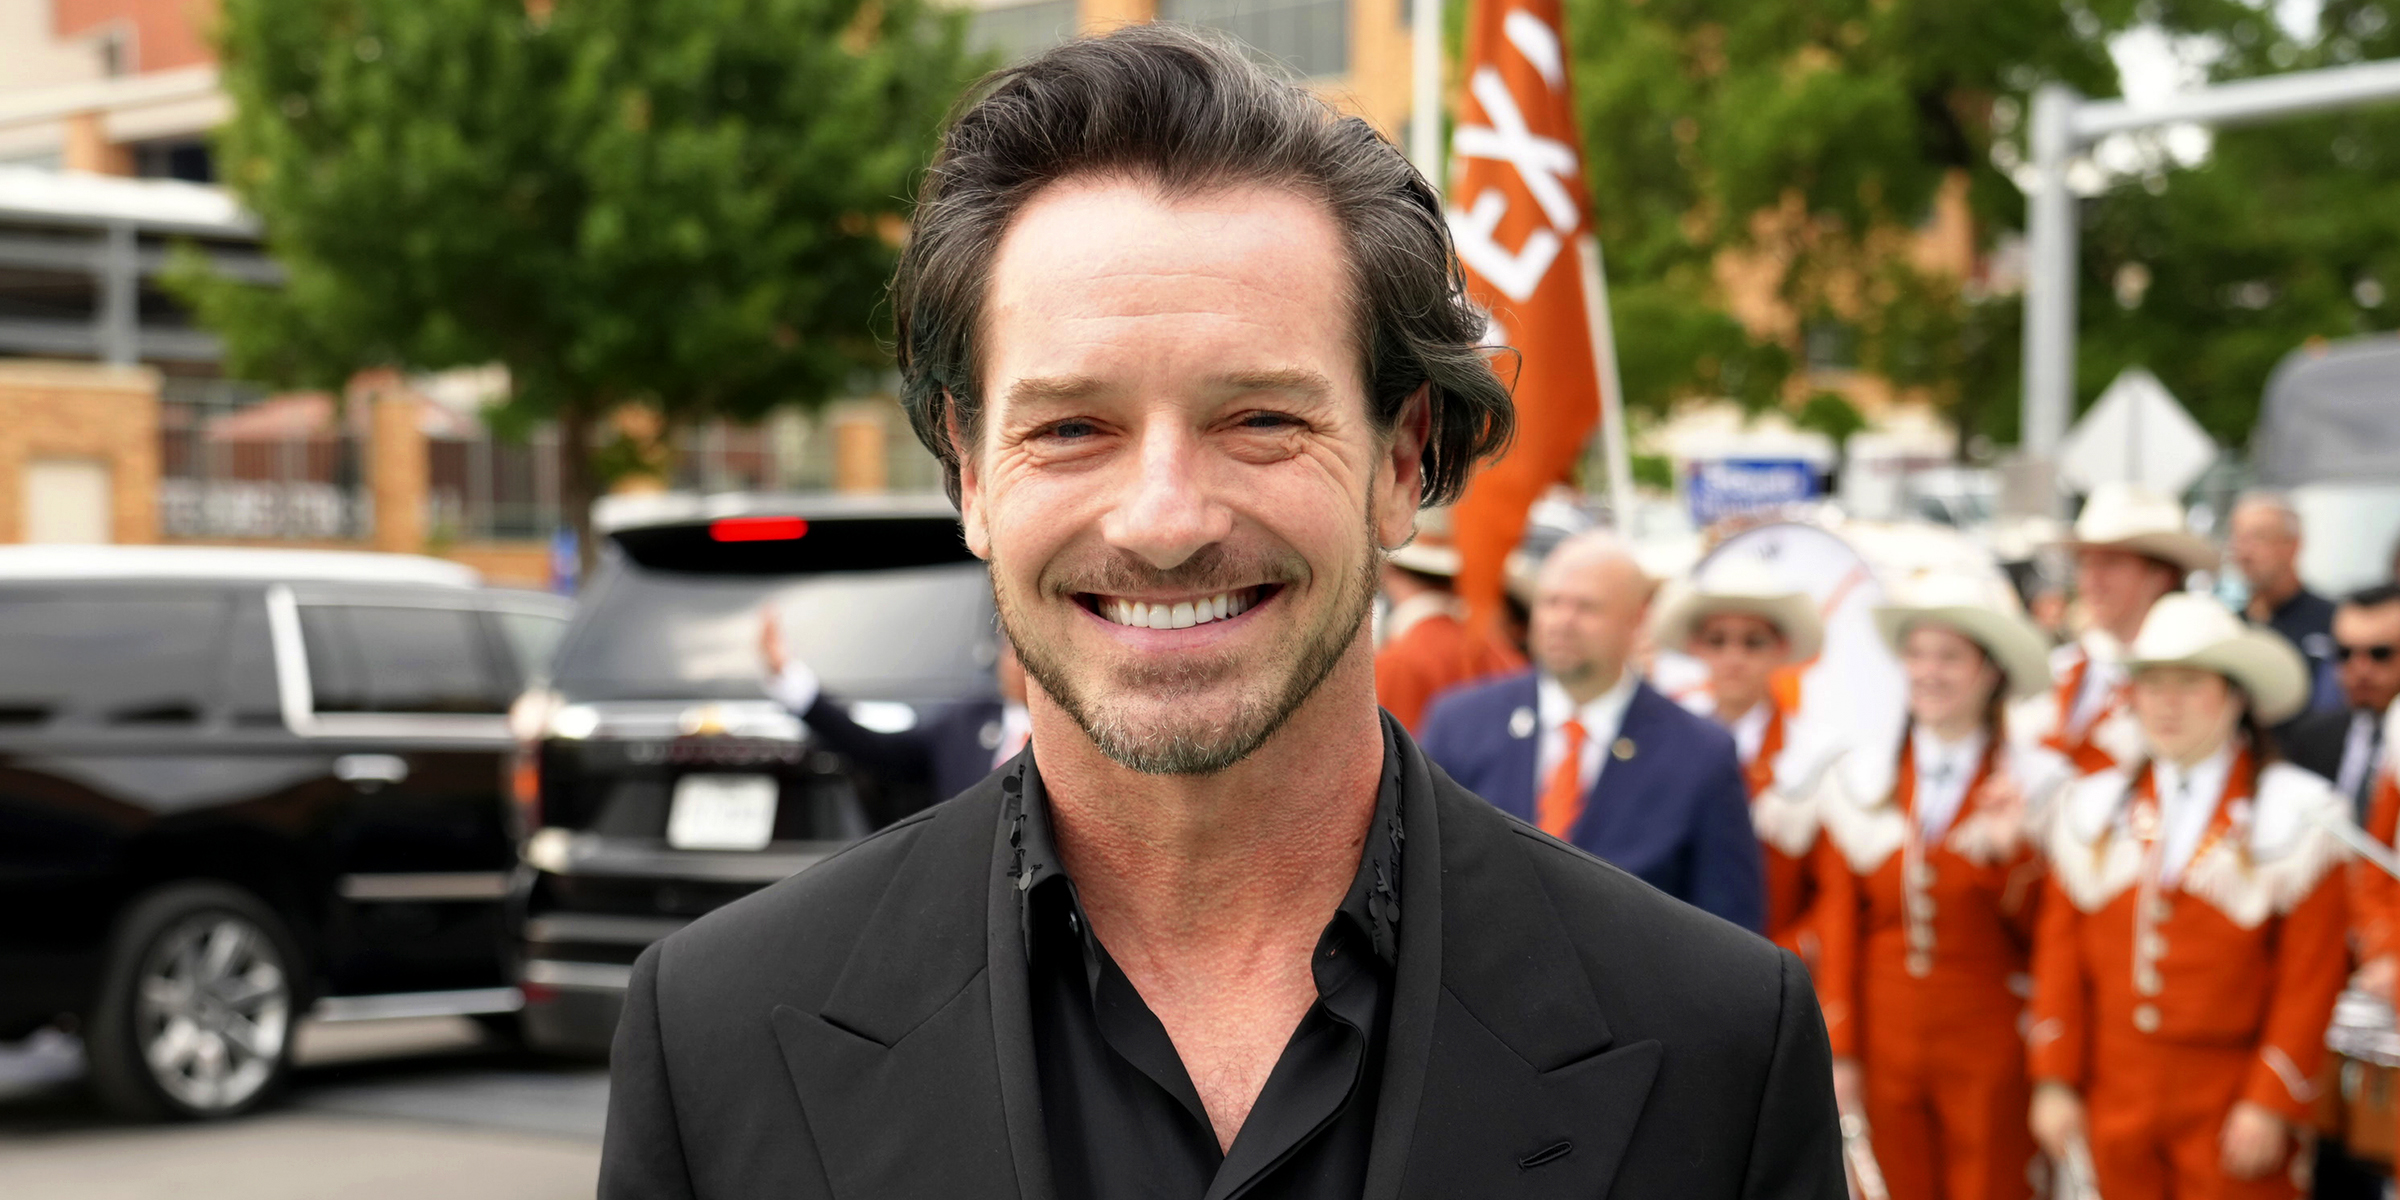 Ian Bohen | Source: Getty Images